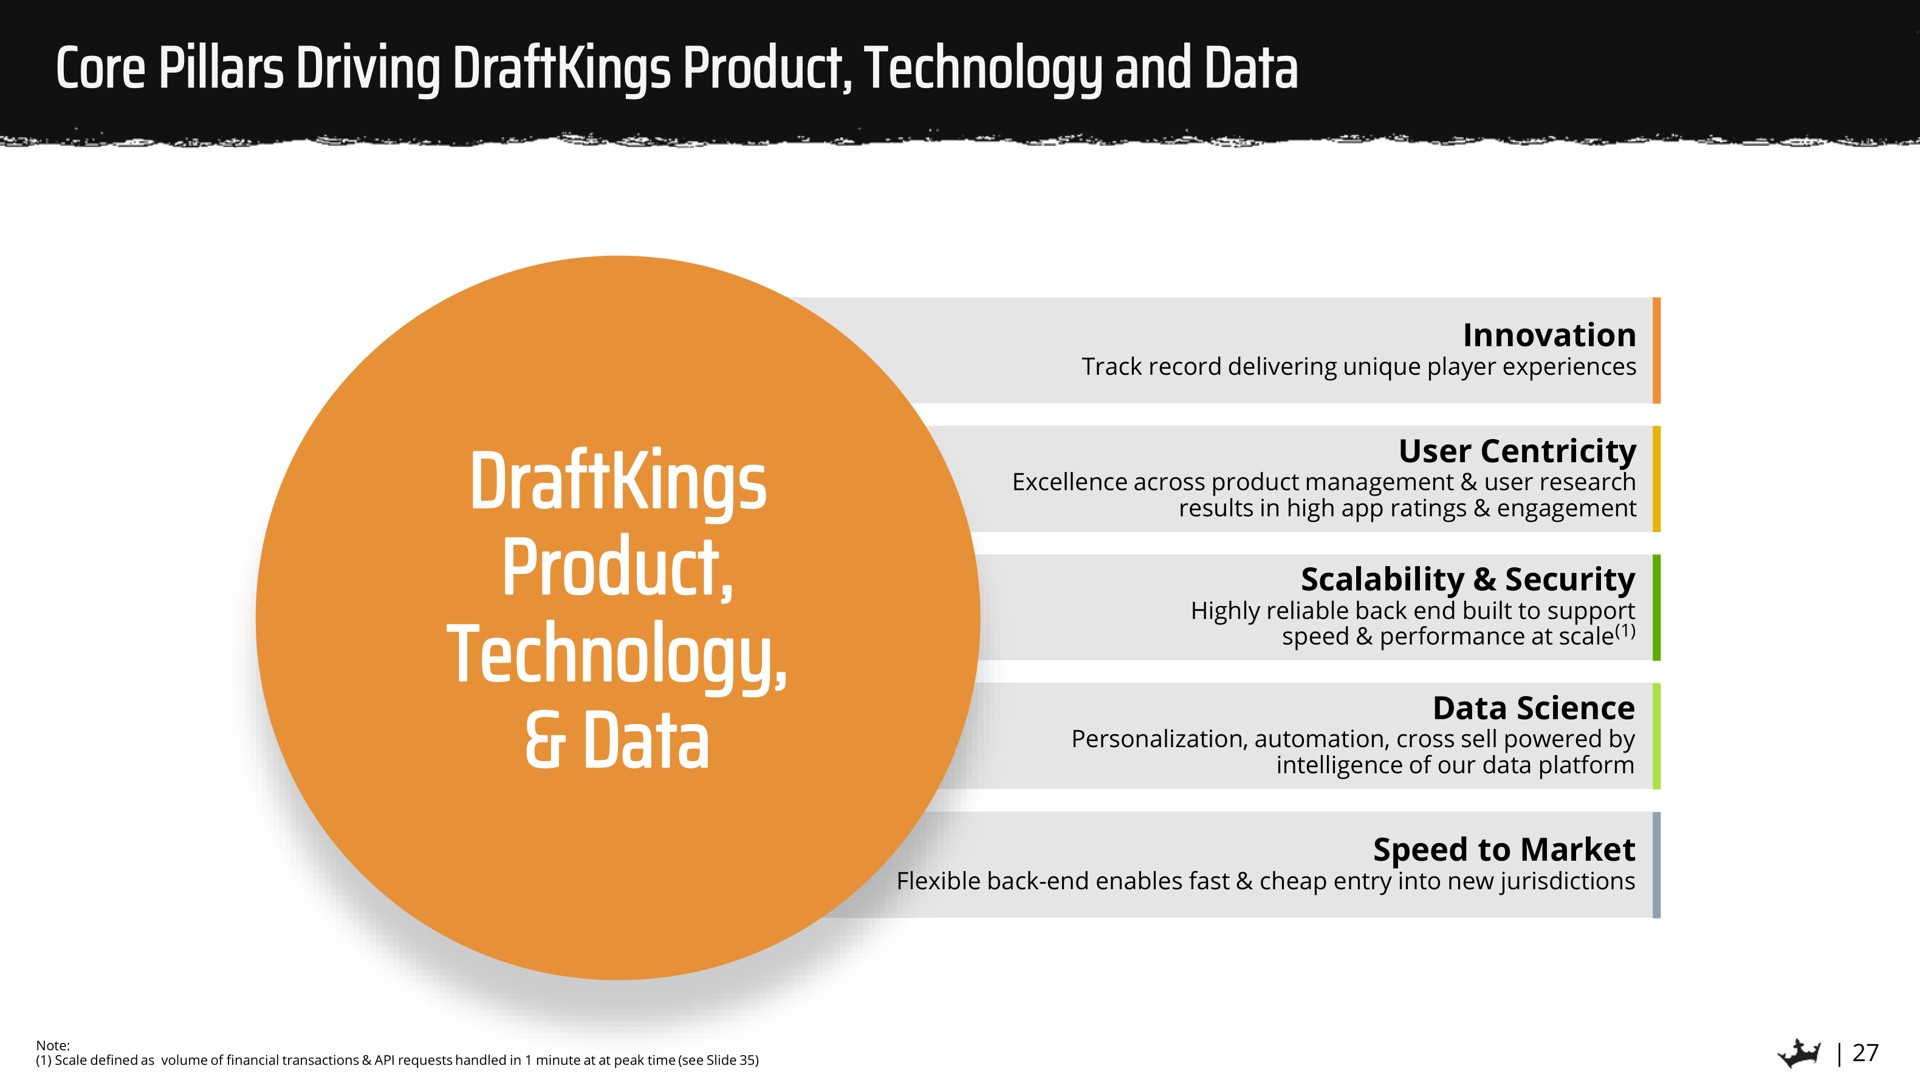 core pillars driving product technology and data product technology data | DraftKings